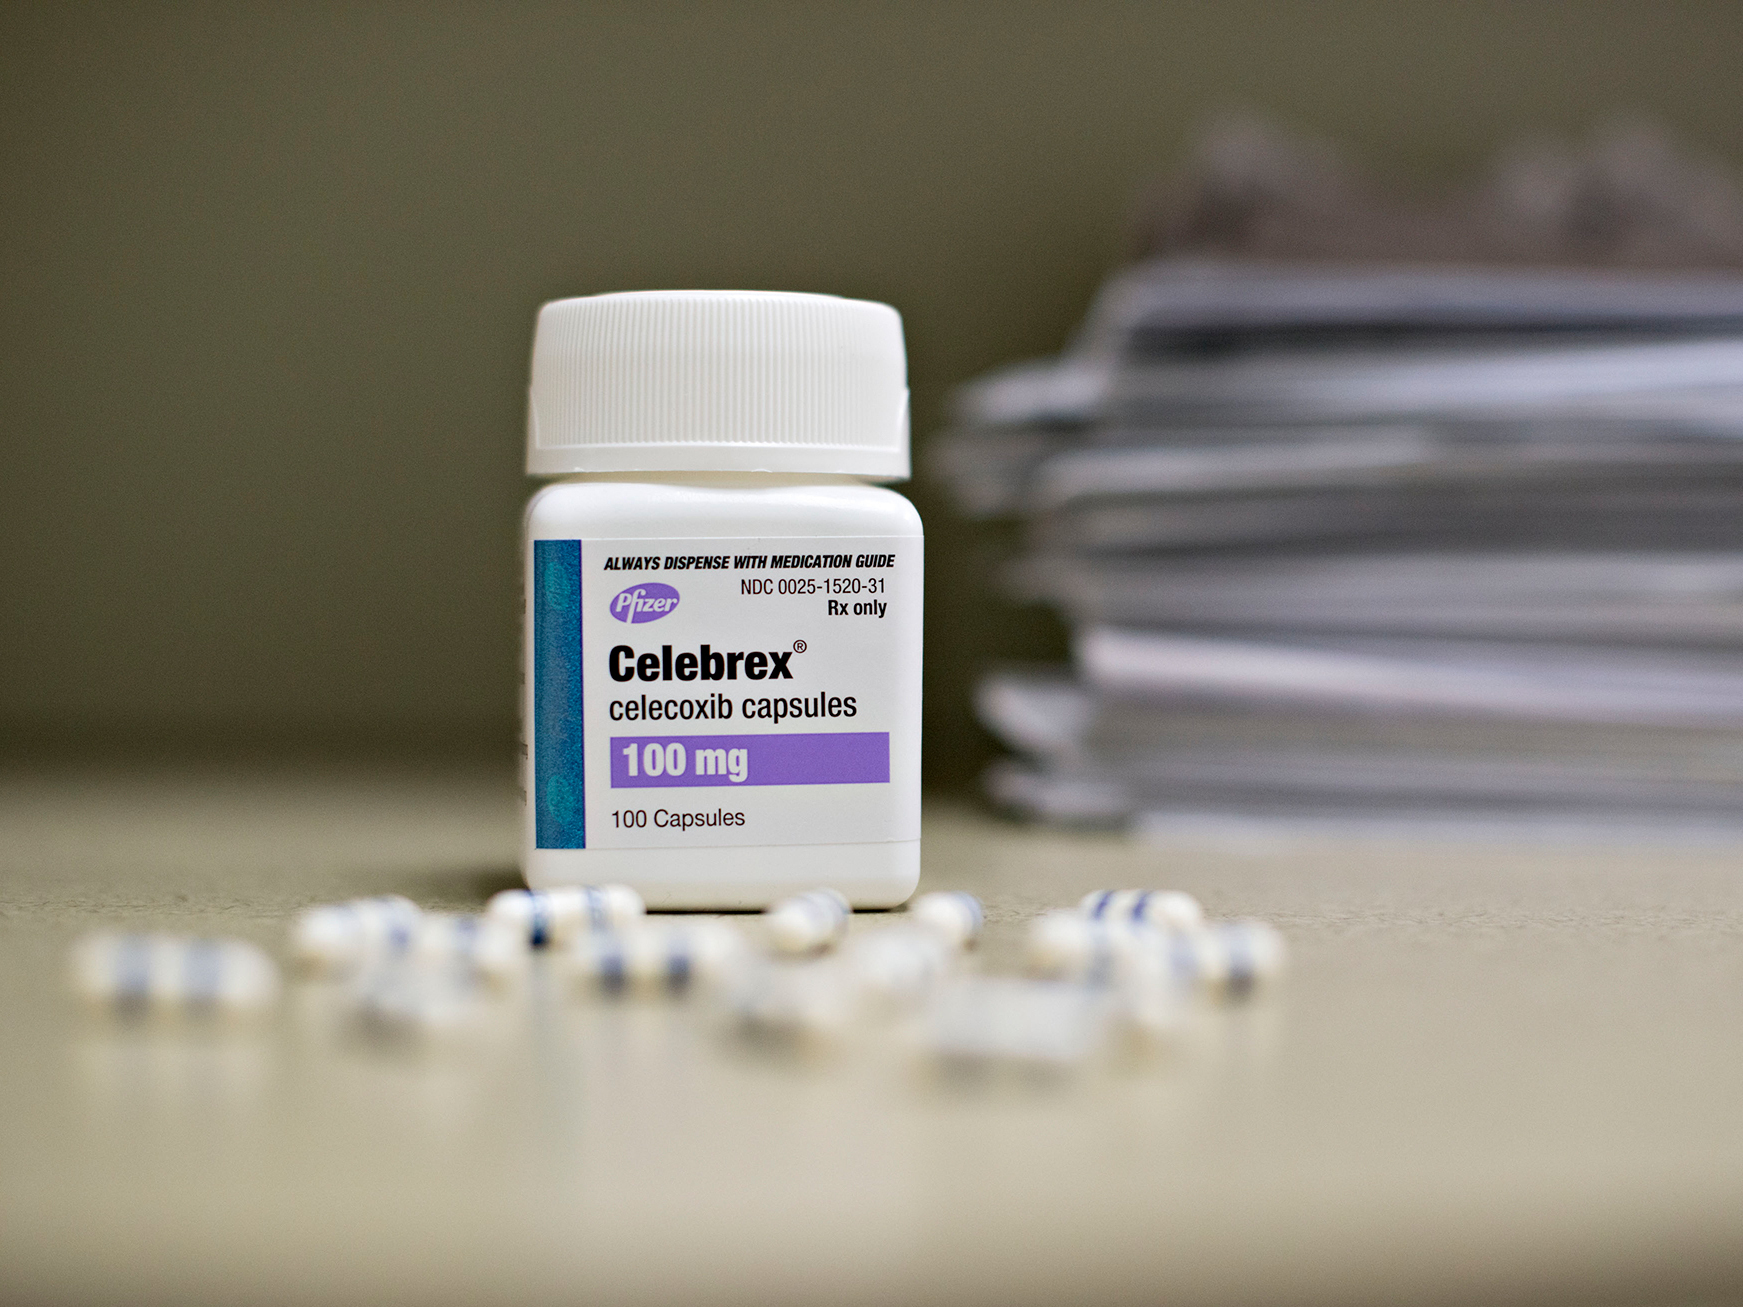 Can tramadol 50mg be taken with celecoxib 200mg